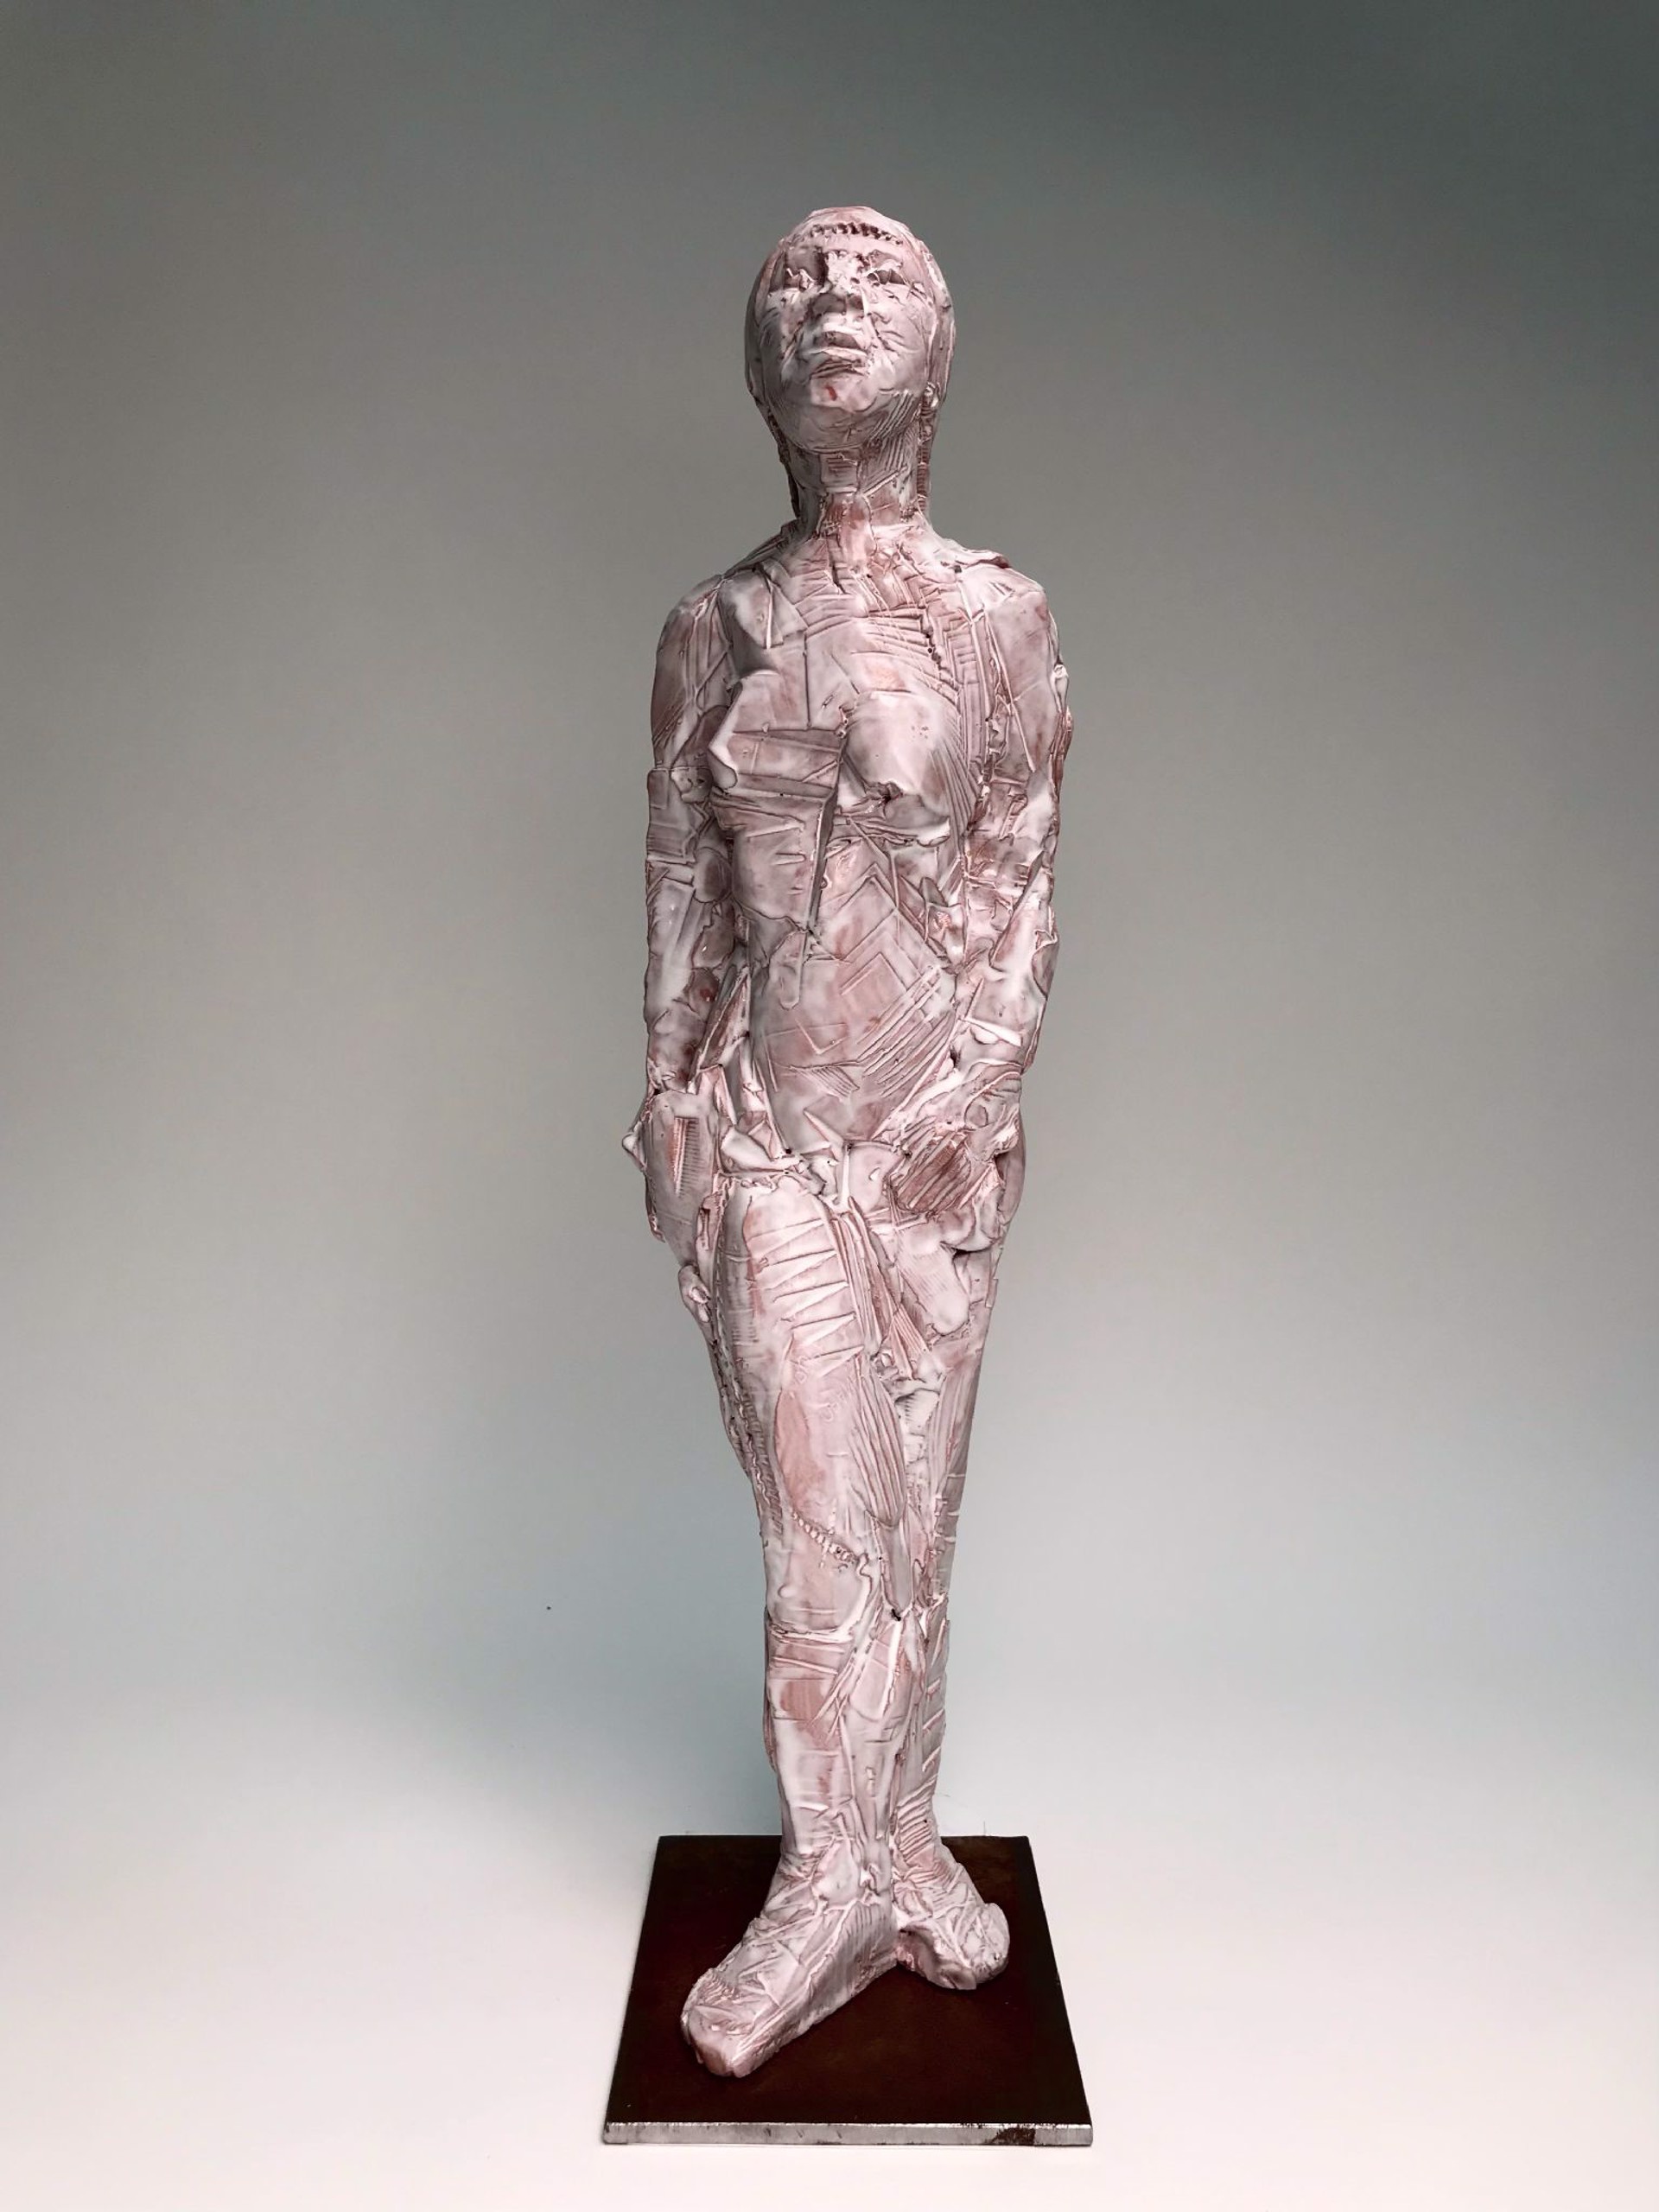 Untitled Figure 3 by Michael O'Keefe